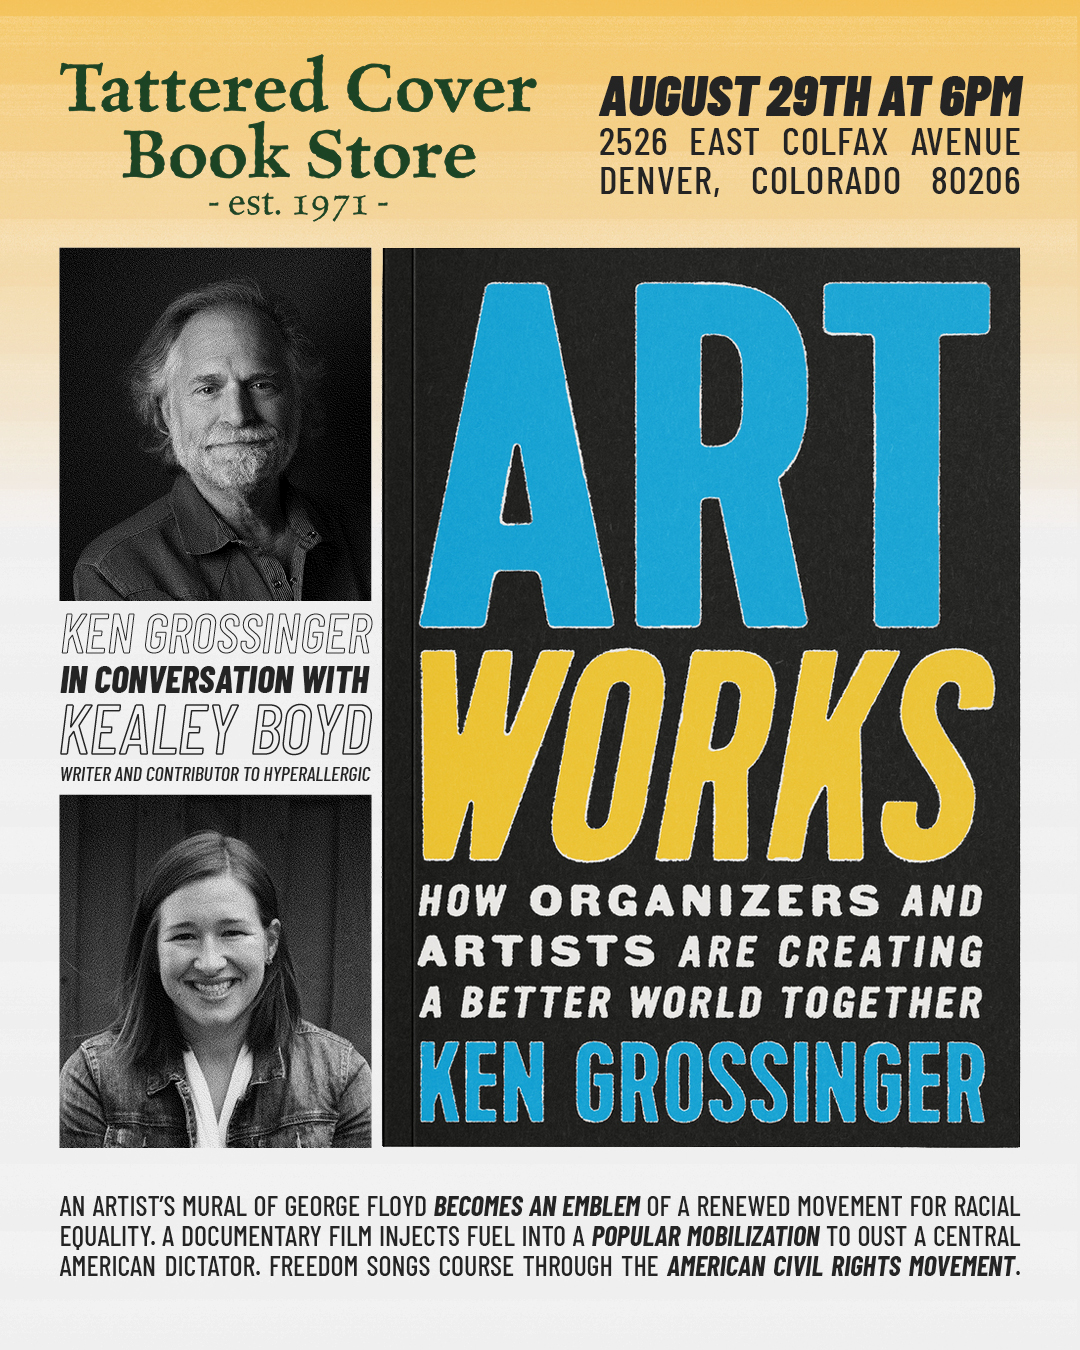 Leaflet for event at the Tattered Cover Book Store in Denver, Colorado, with author Ken Grossinger in conversation with Kealey Boyd.